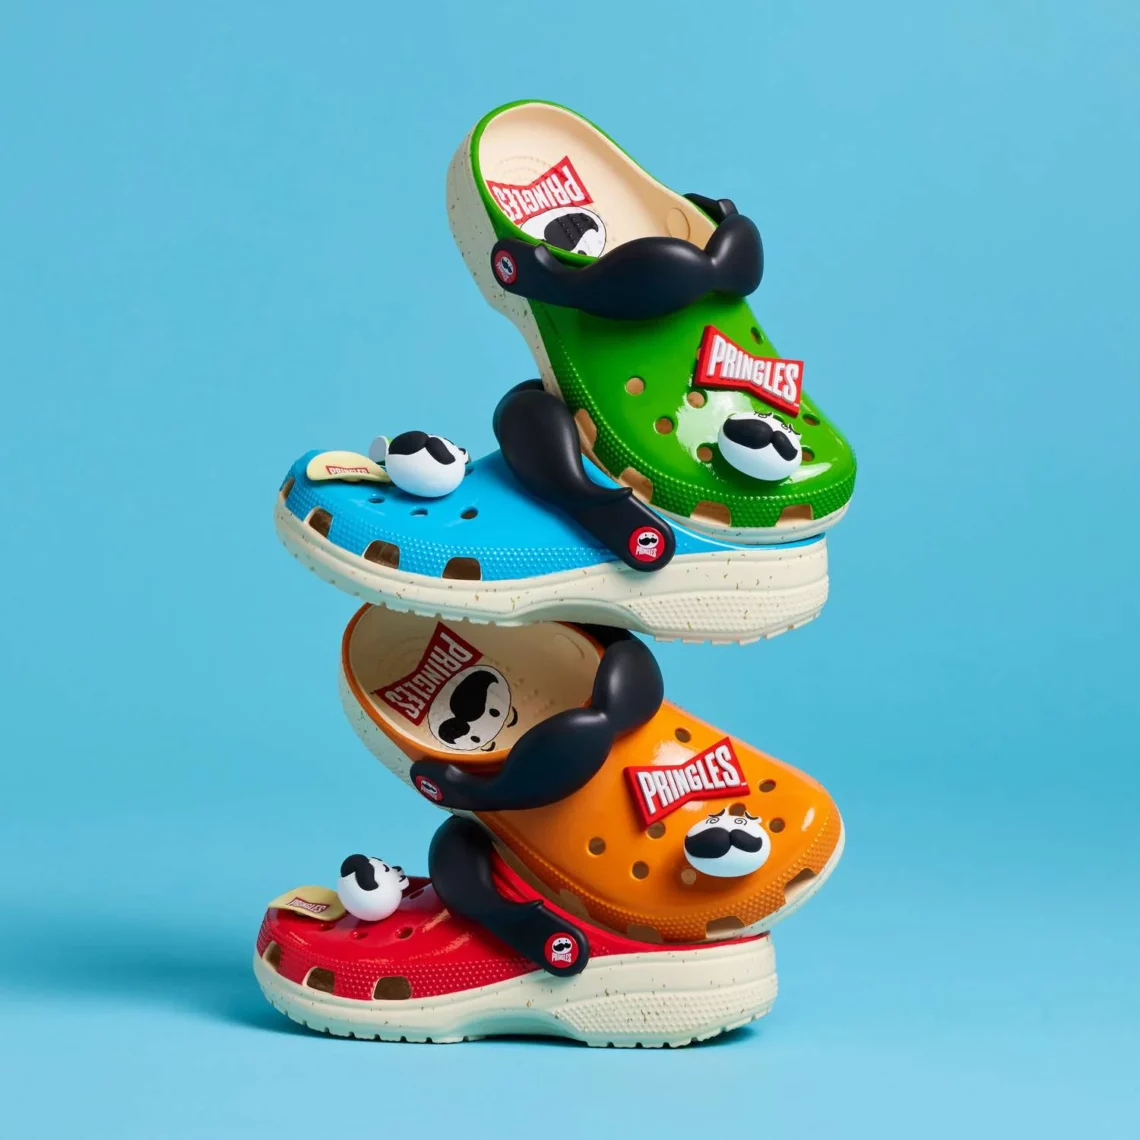 Colorful Pringles branded crocs adorned with mustache and cow print charms on a blue background.